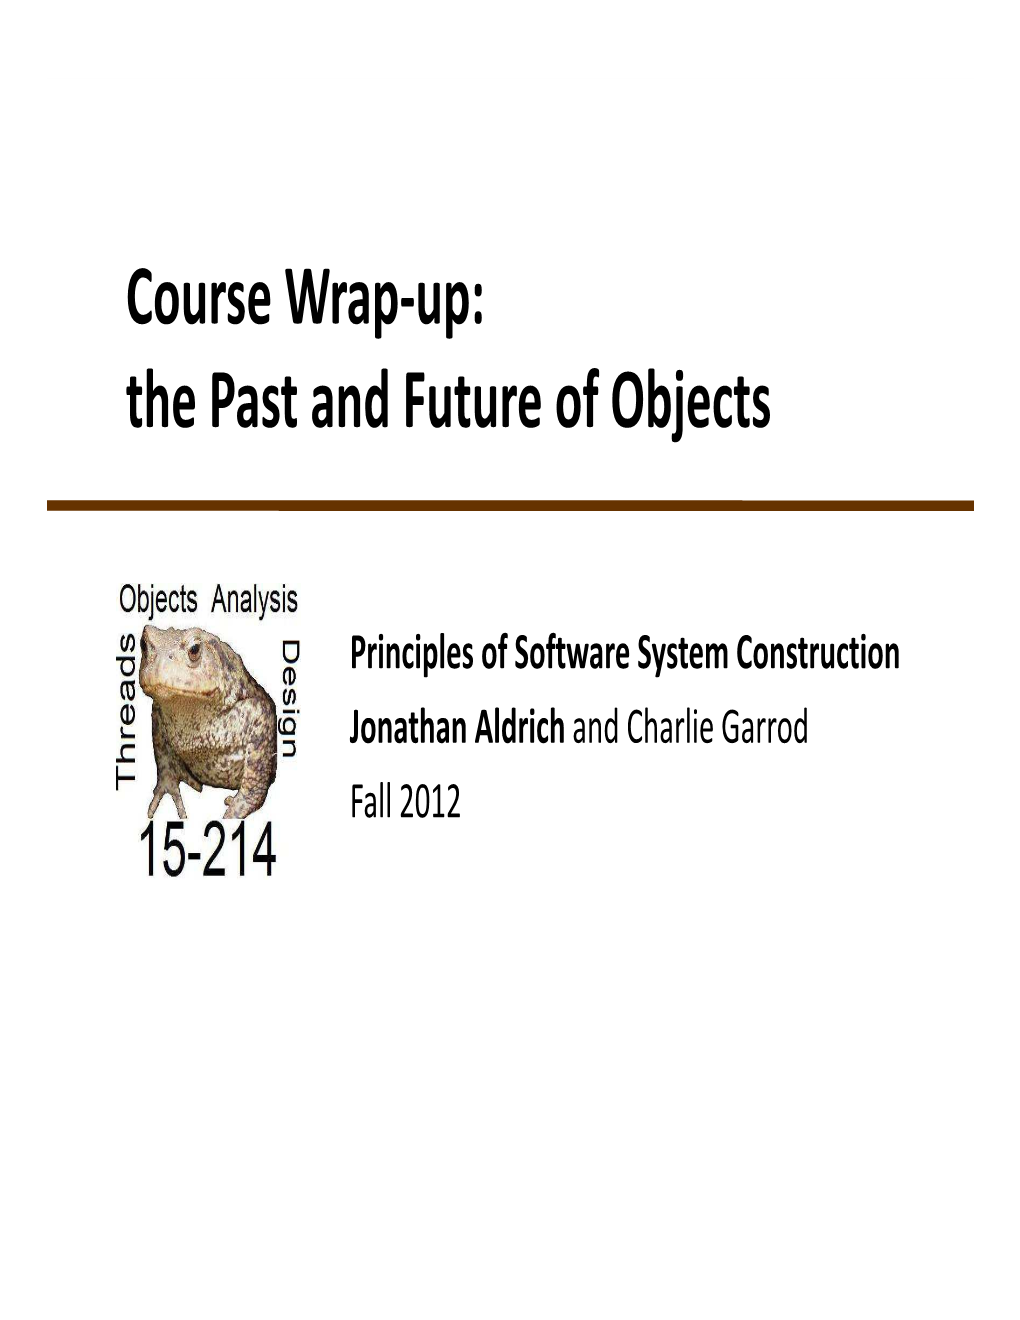 Course Wrap-Up: the Past and Future of Objects Principles of Software